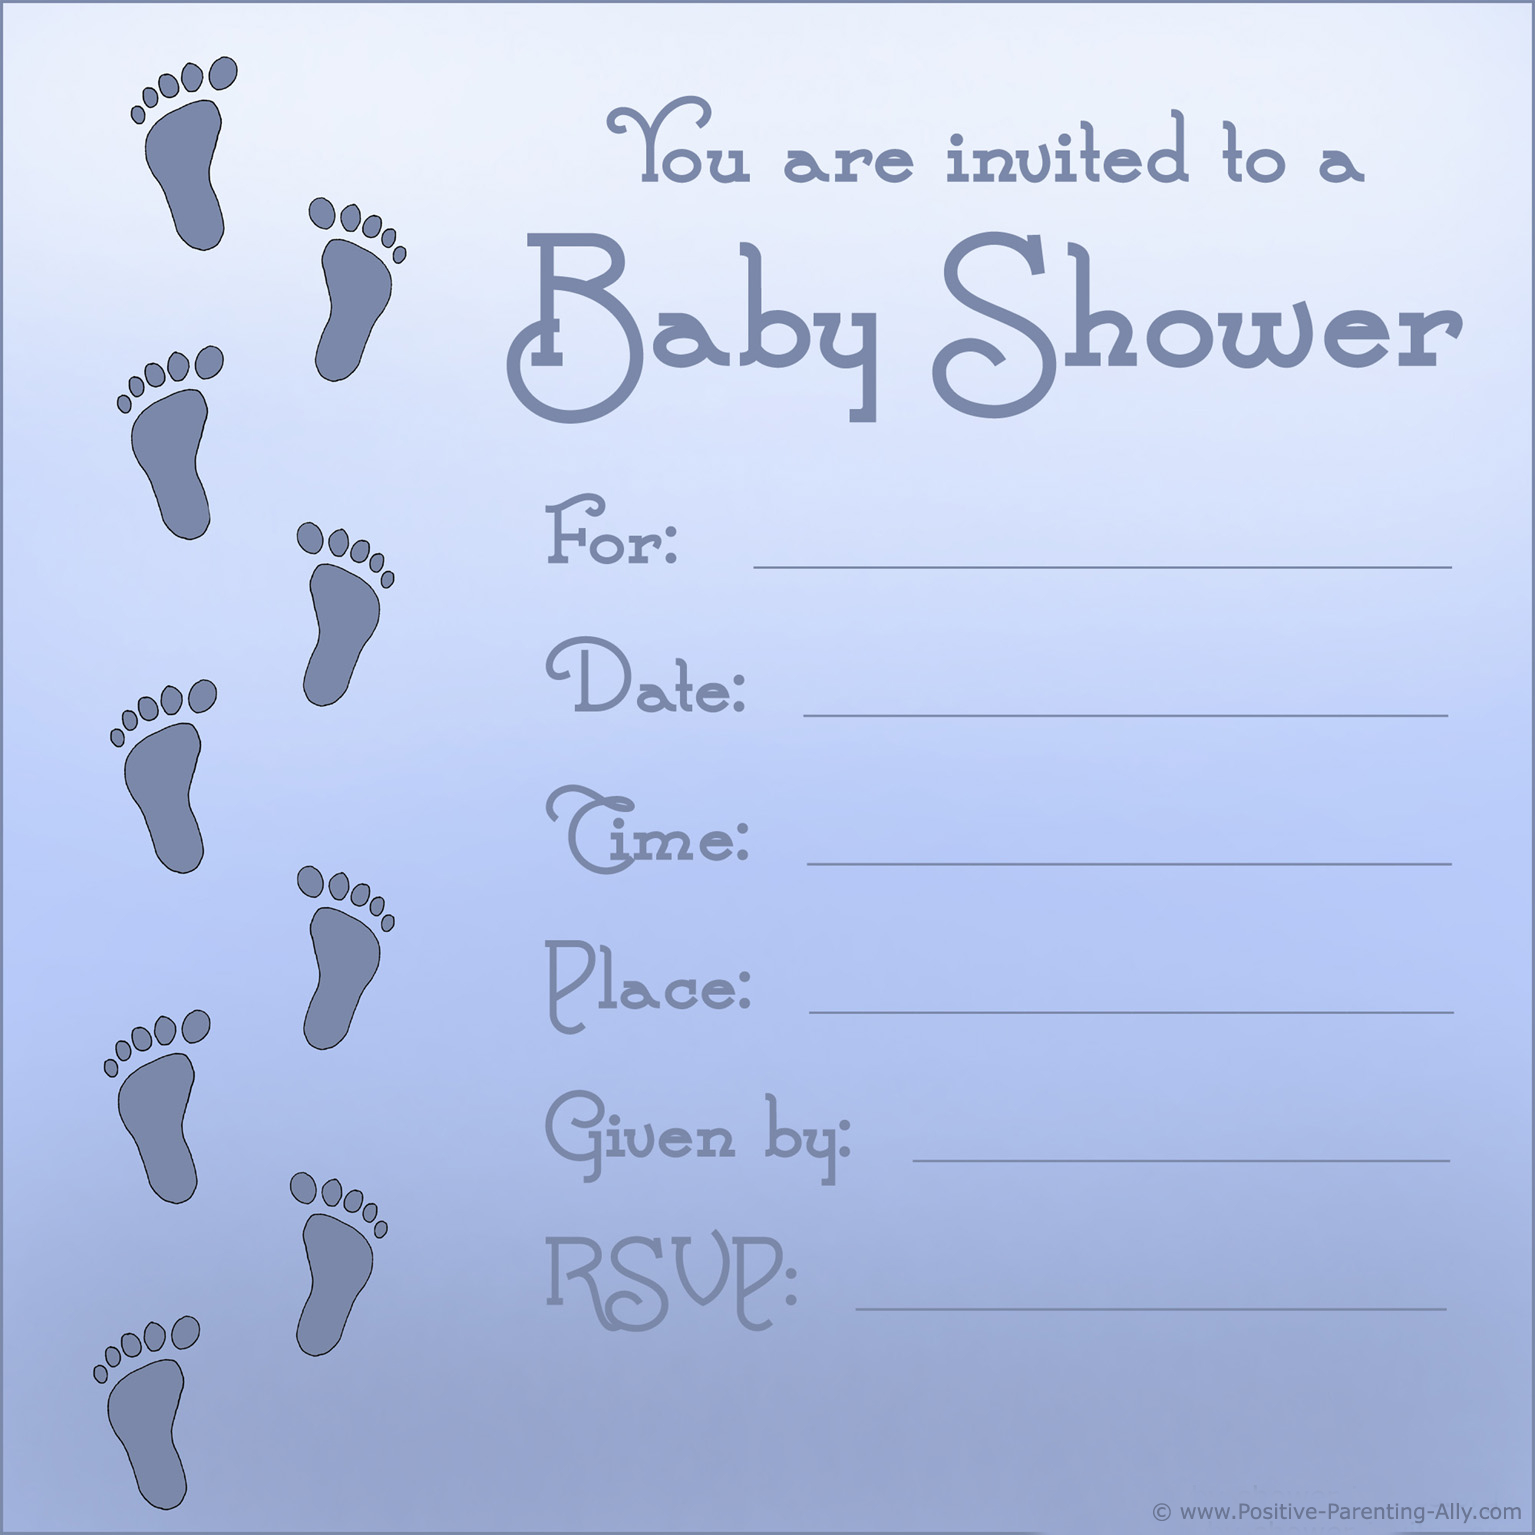 Free Printable Baby Shower Invitations In High Quality Resolution throughout Free Printable Baby Shower Invitations For Boys